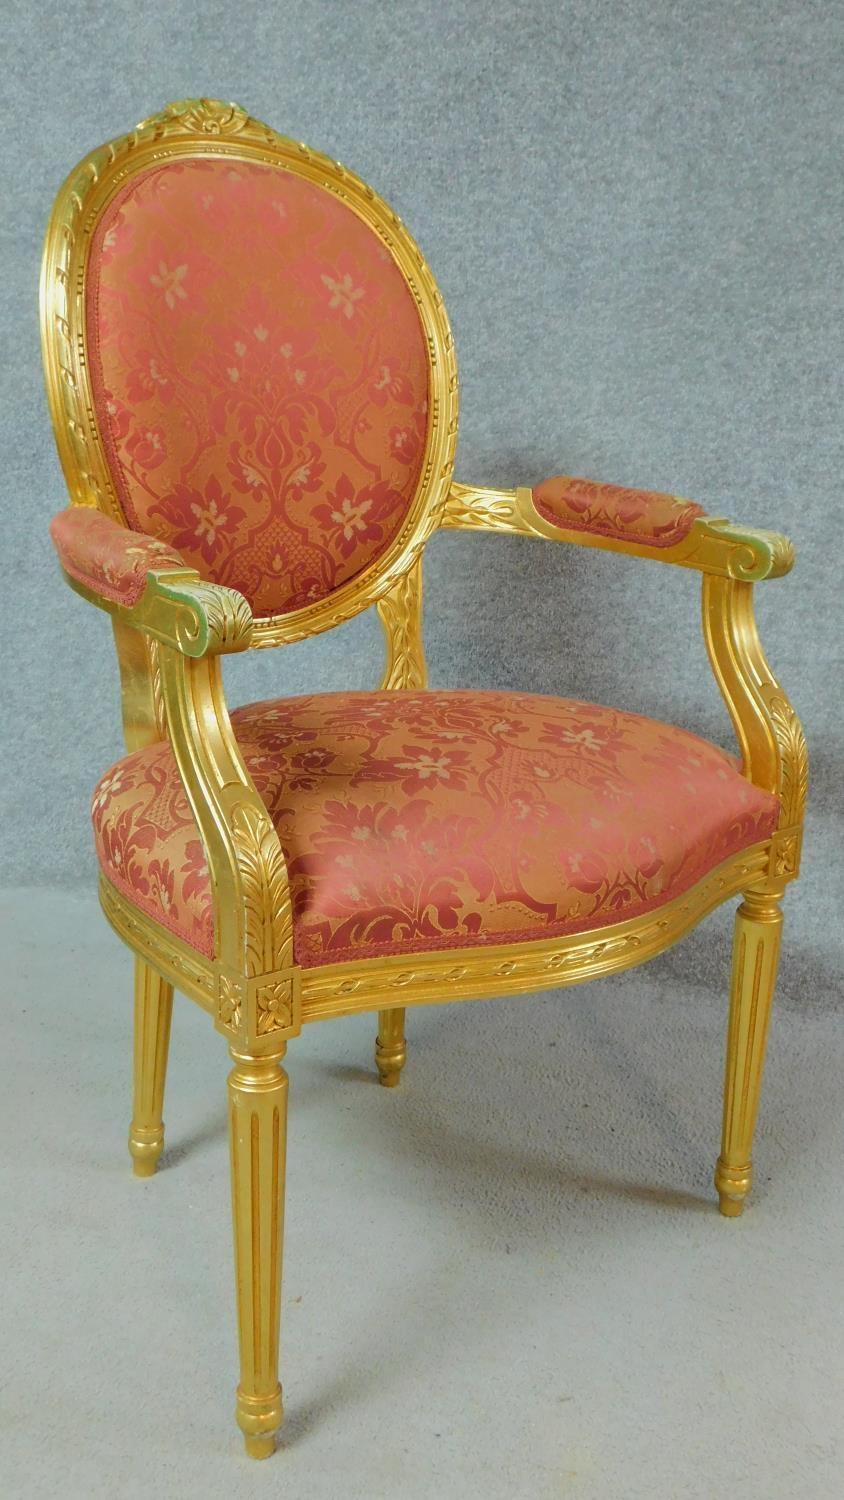 A gilt framed fauteuil in the Louis XVl style in floral rouge upholstery. H.104cm - Image 2 of 7